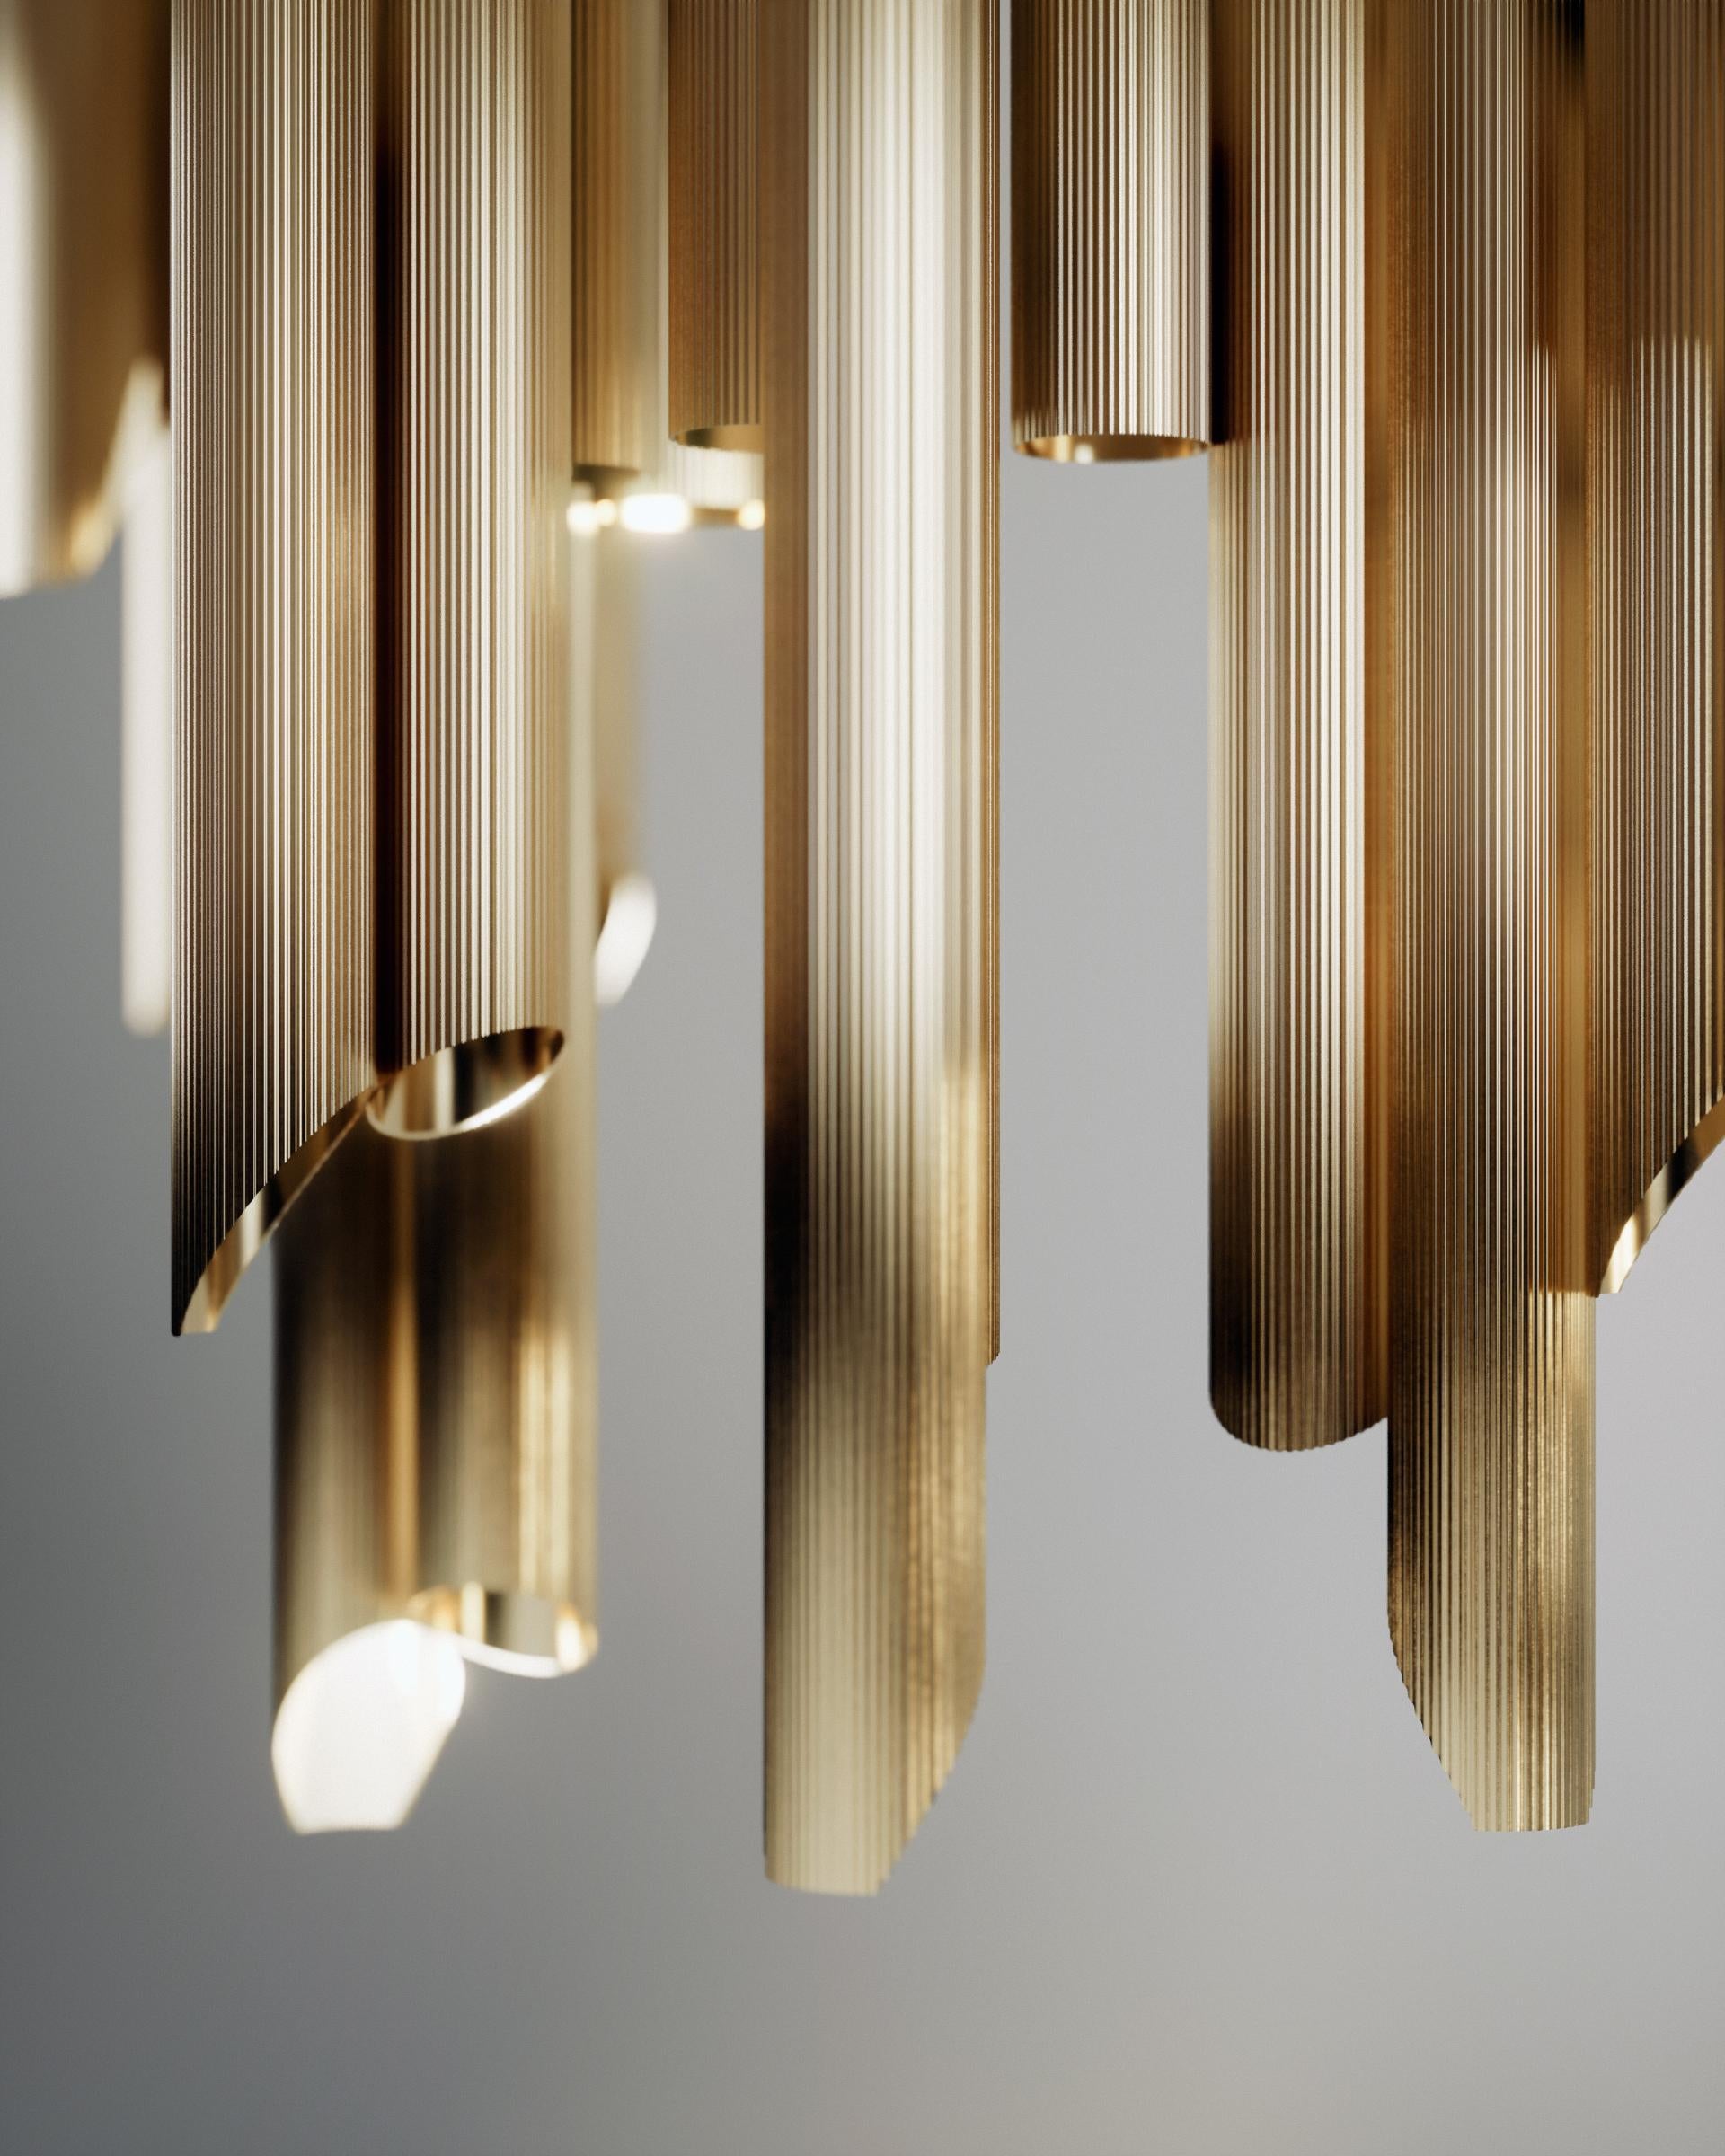 Armilla chandelier by Scattered Disc Objects
Dimensions: D 120 x W 50 x H 50 cm
Material: Brass striped pipes, aluminum, Led spot light, steel cables.

Armilla invites to a relationship with light. The tubes, like Doric columns, call for a